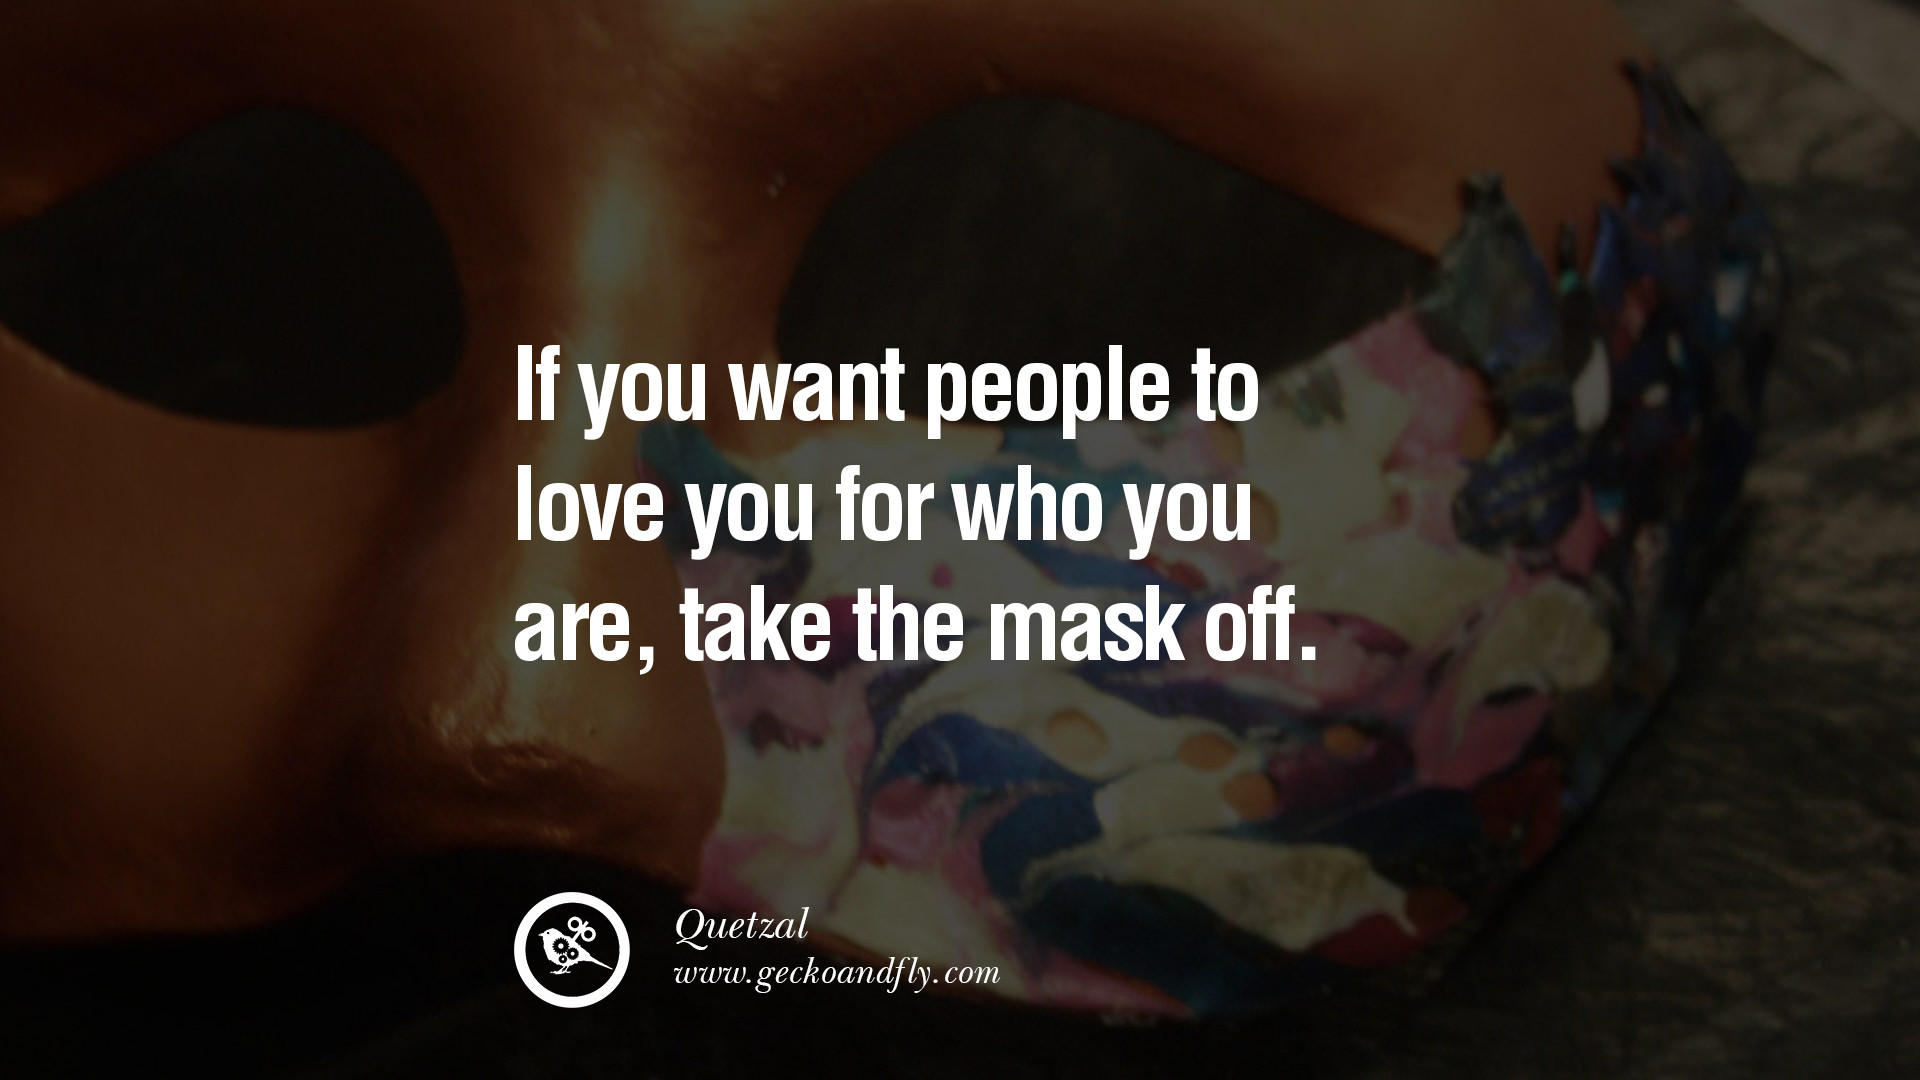 Quotes About People Wearing Masks. QuotesGram